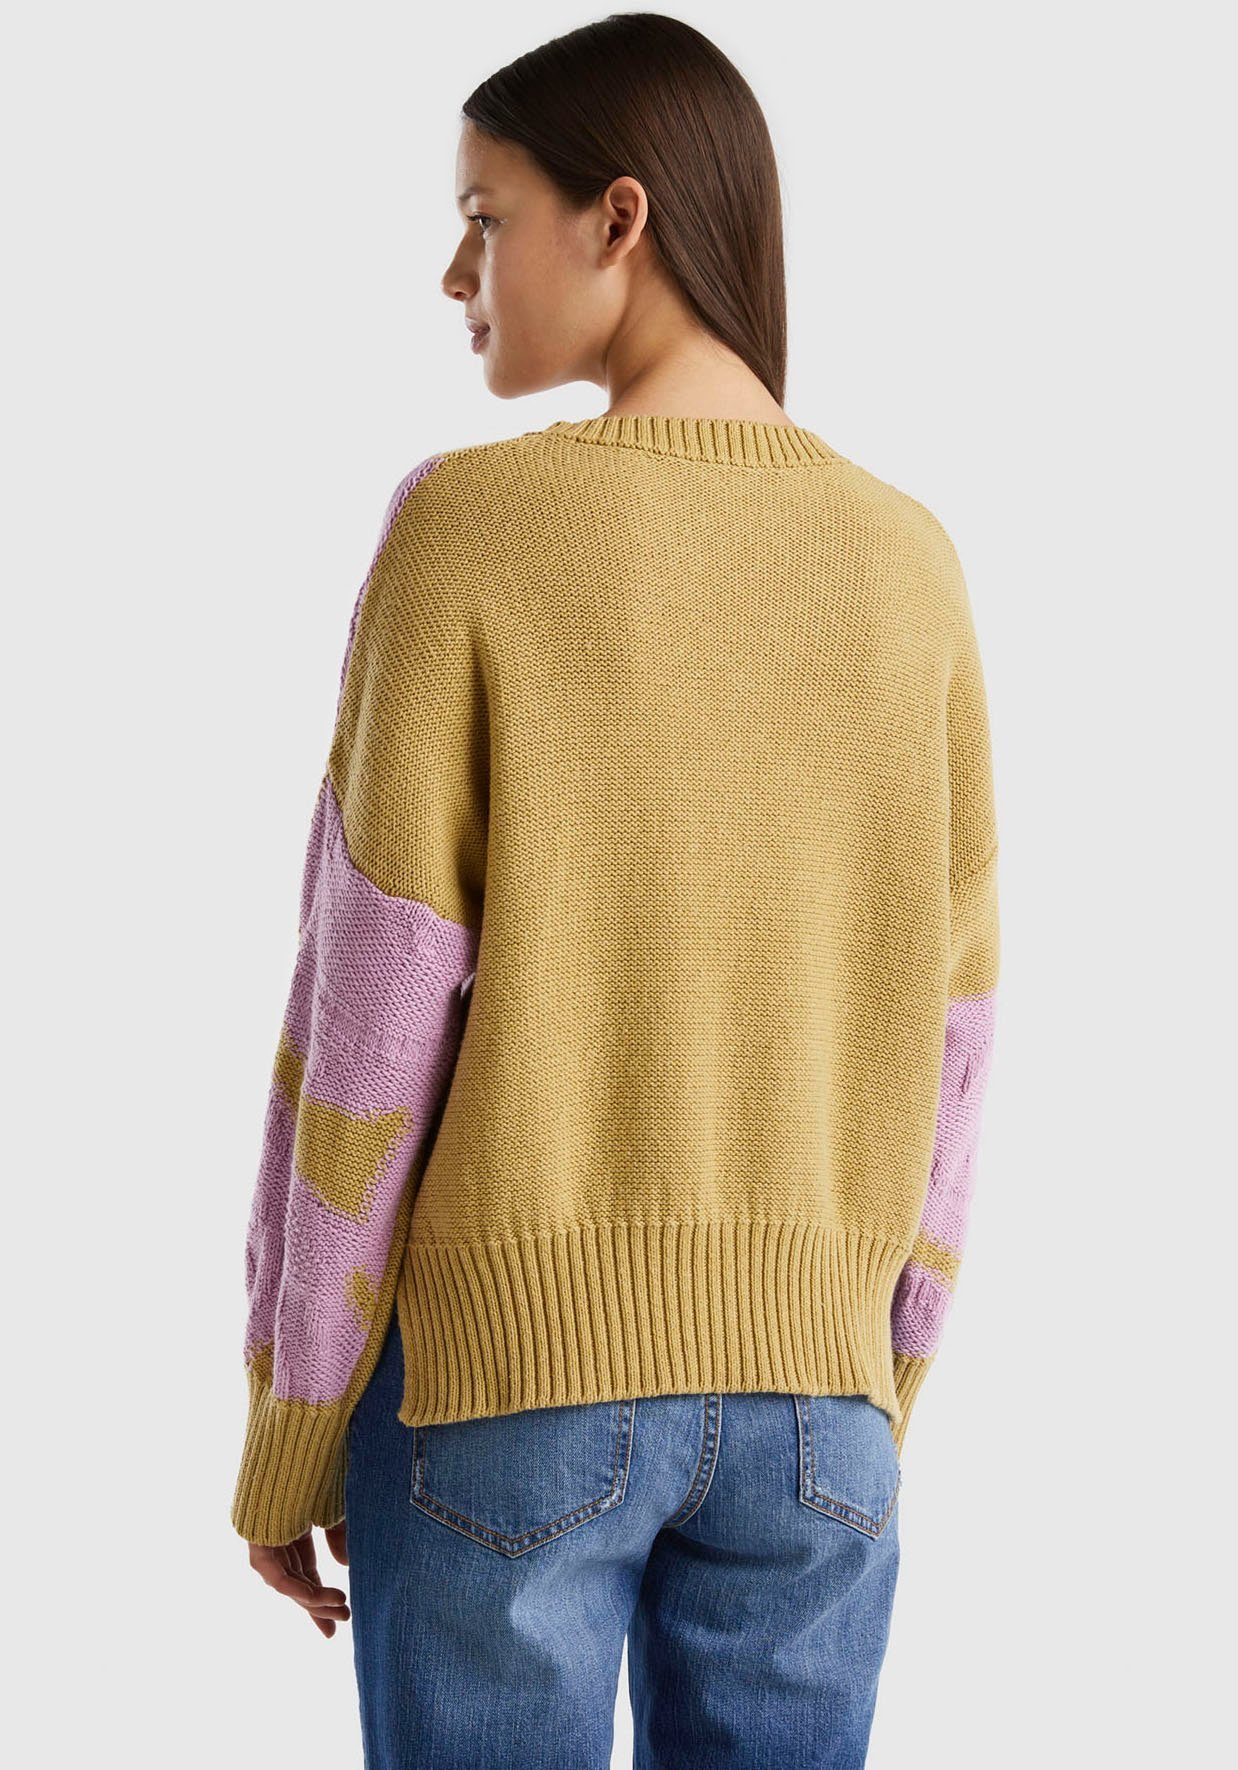 United von Benetton Benetton United Colors of Strickpullover, of Pullover Colors